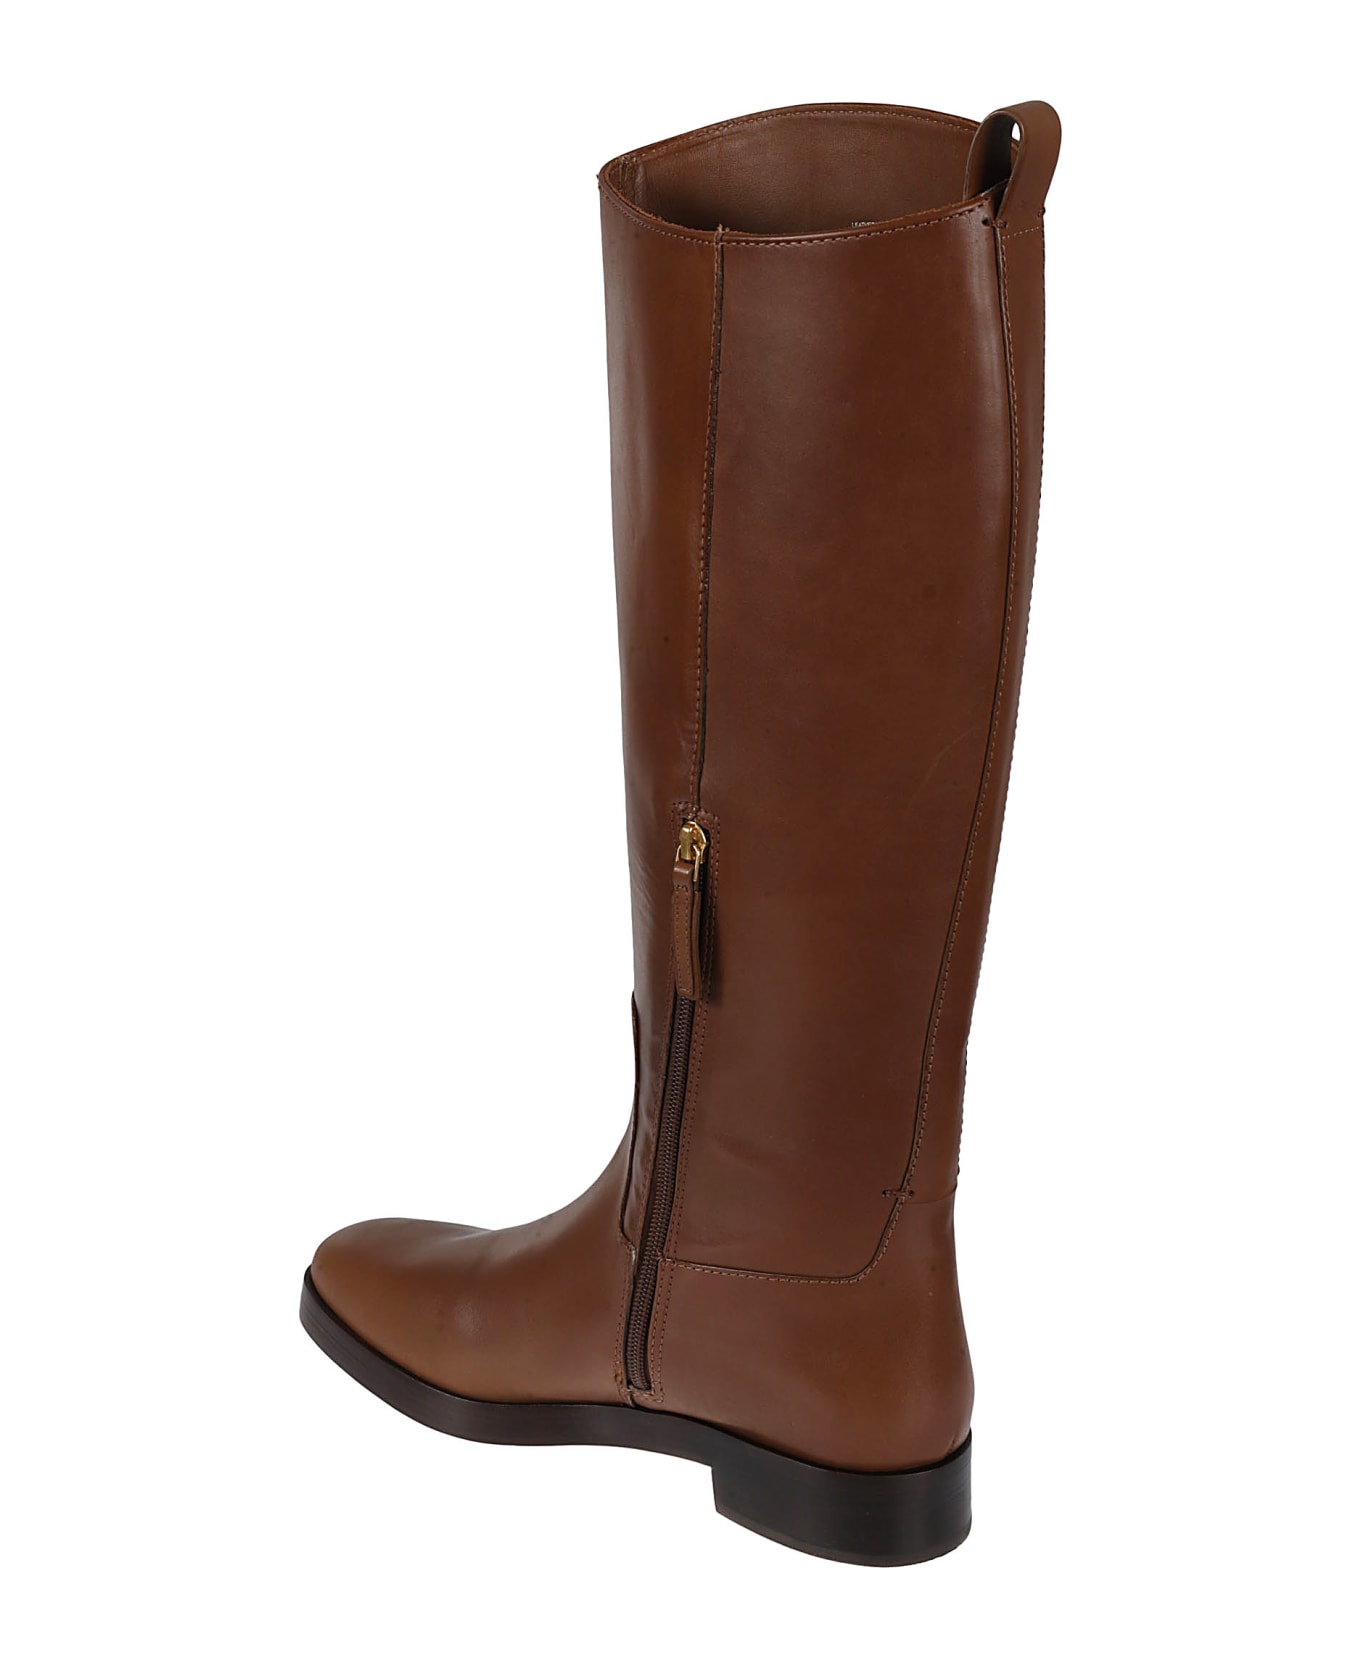 Tory Burch The Riding Over-the-knee Boots - PALISSANDRO